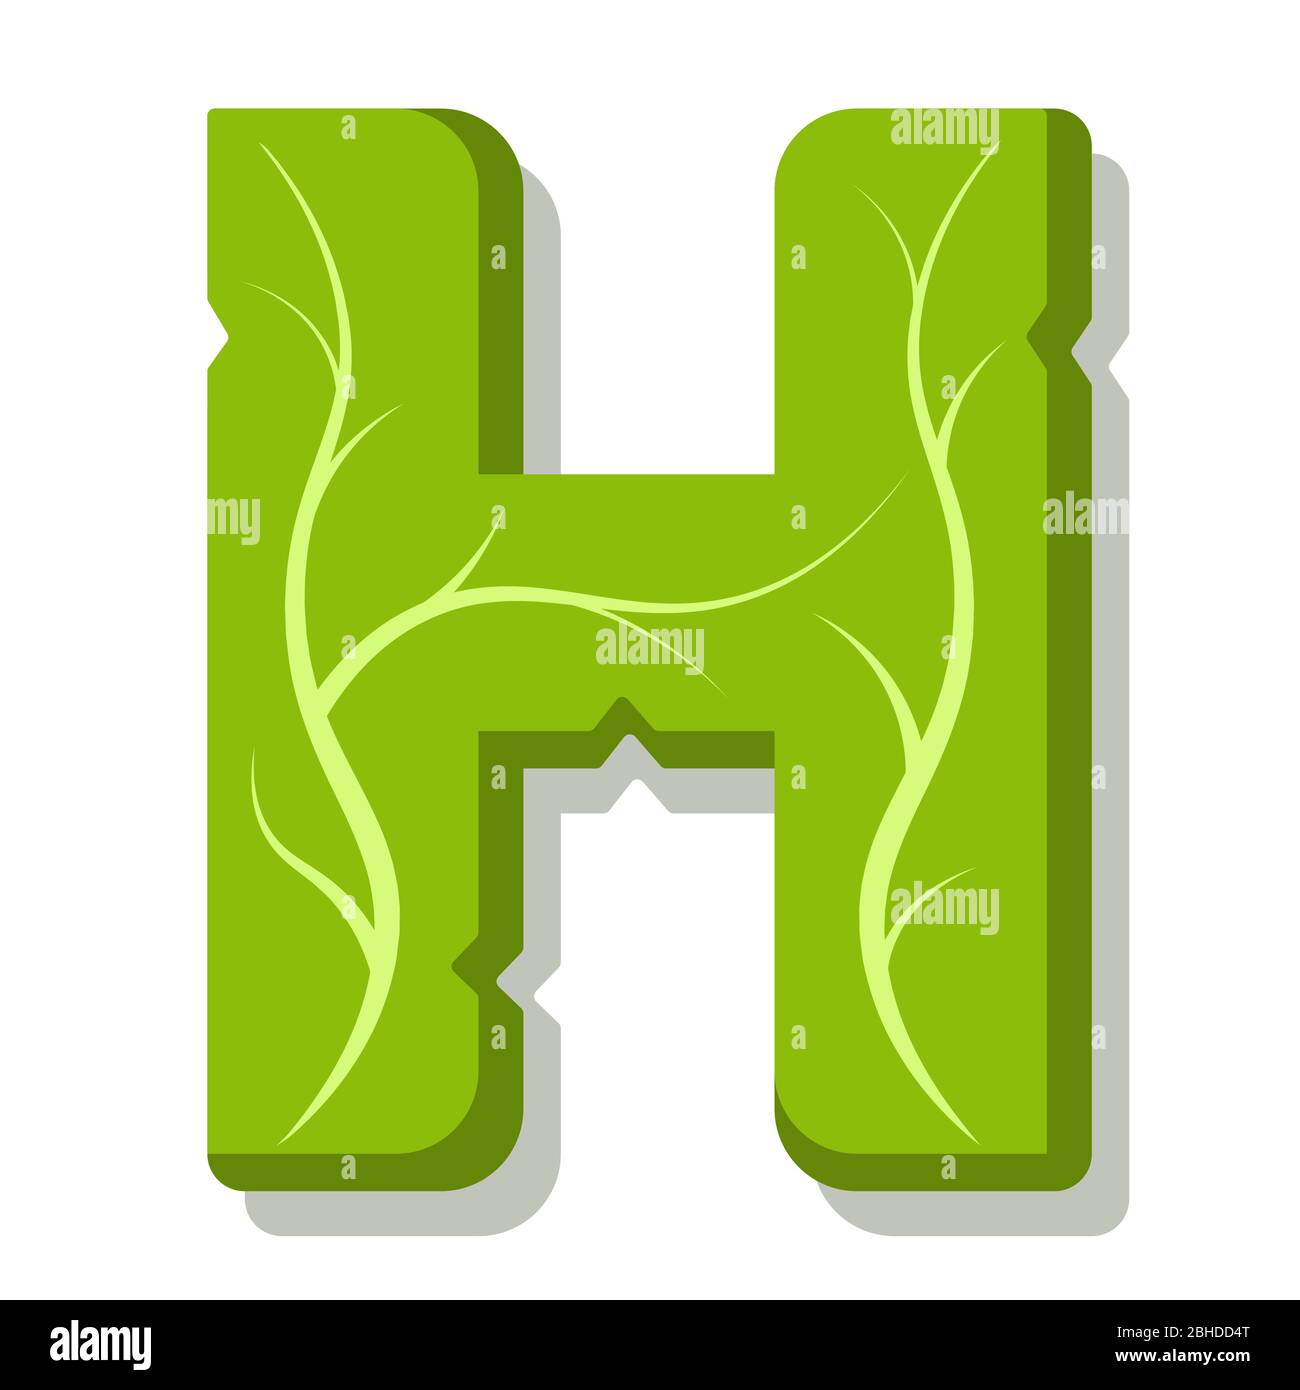 https://c8.alamy.com/comp/2BHDD4T/letter-h-green-leaves-summer-vector-alphabet-the-simple-logo-of-letter-h-green-color-isolated-illustration-on-white-background-2BHDD4T.jpg